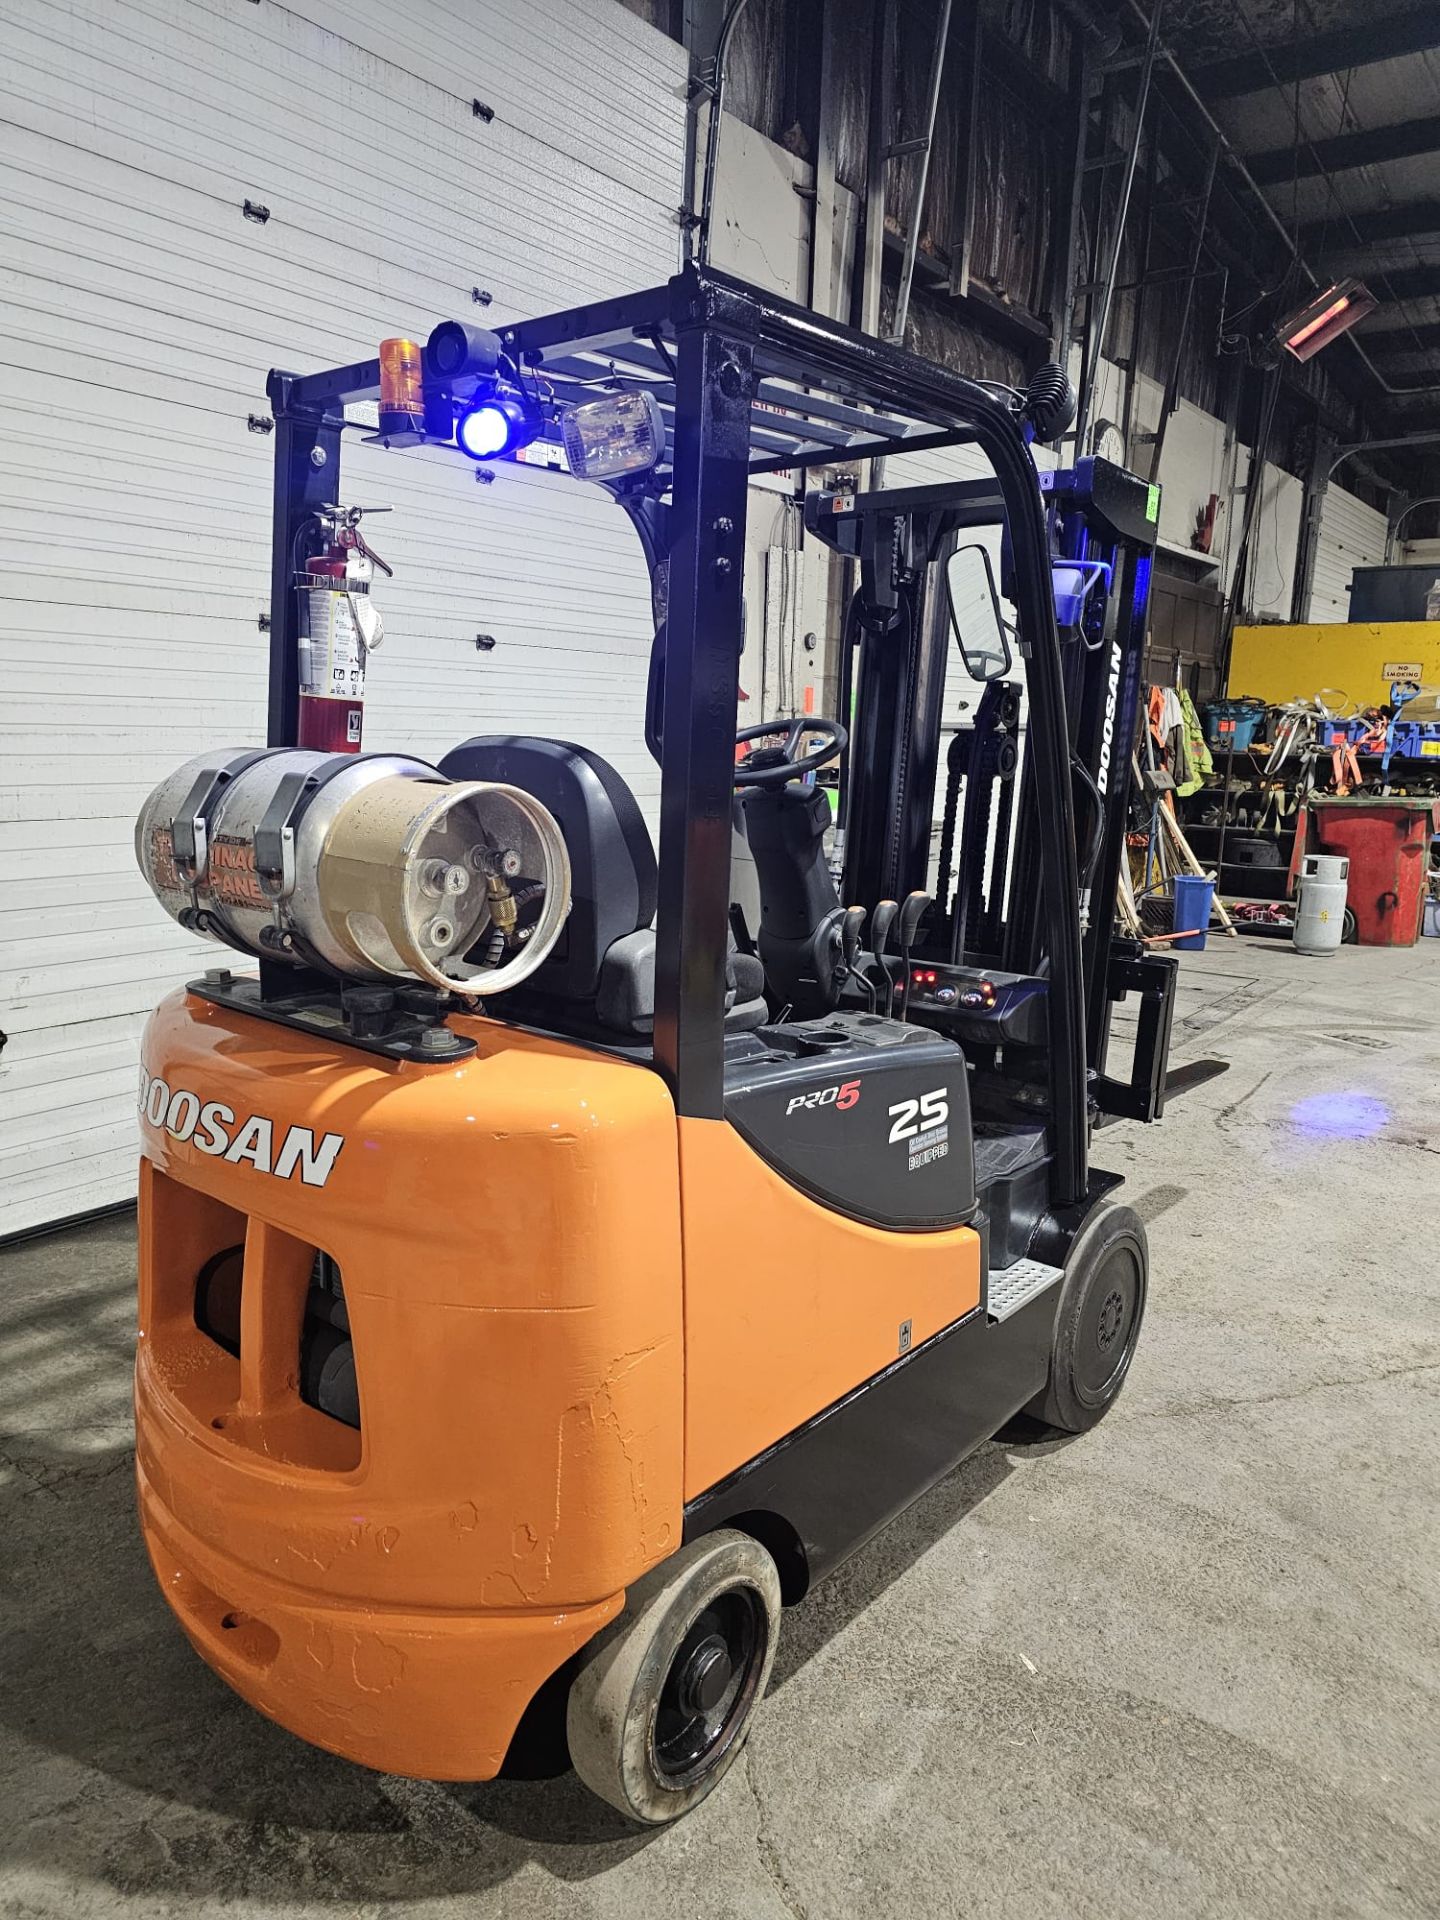 2015 DOOSAN 5,000lbs Capacity LPG (Propane) Forklift with sideshift 3-STAGE MAST with 189" LOAD - Image 2 of 5